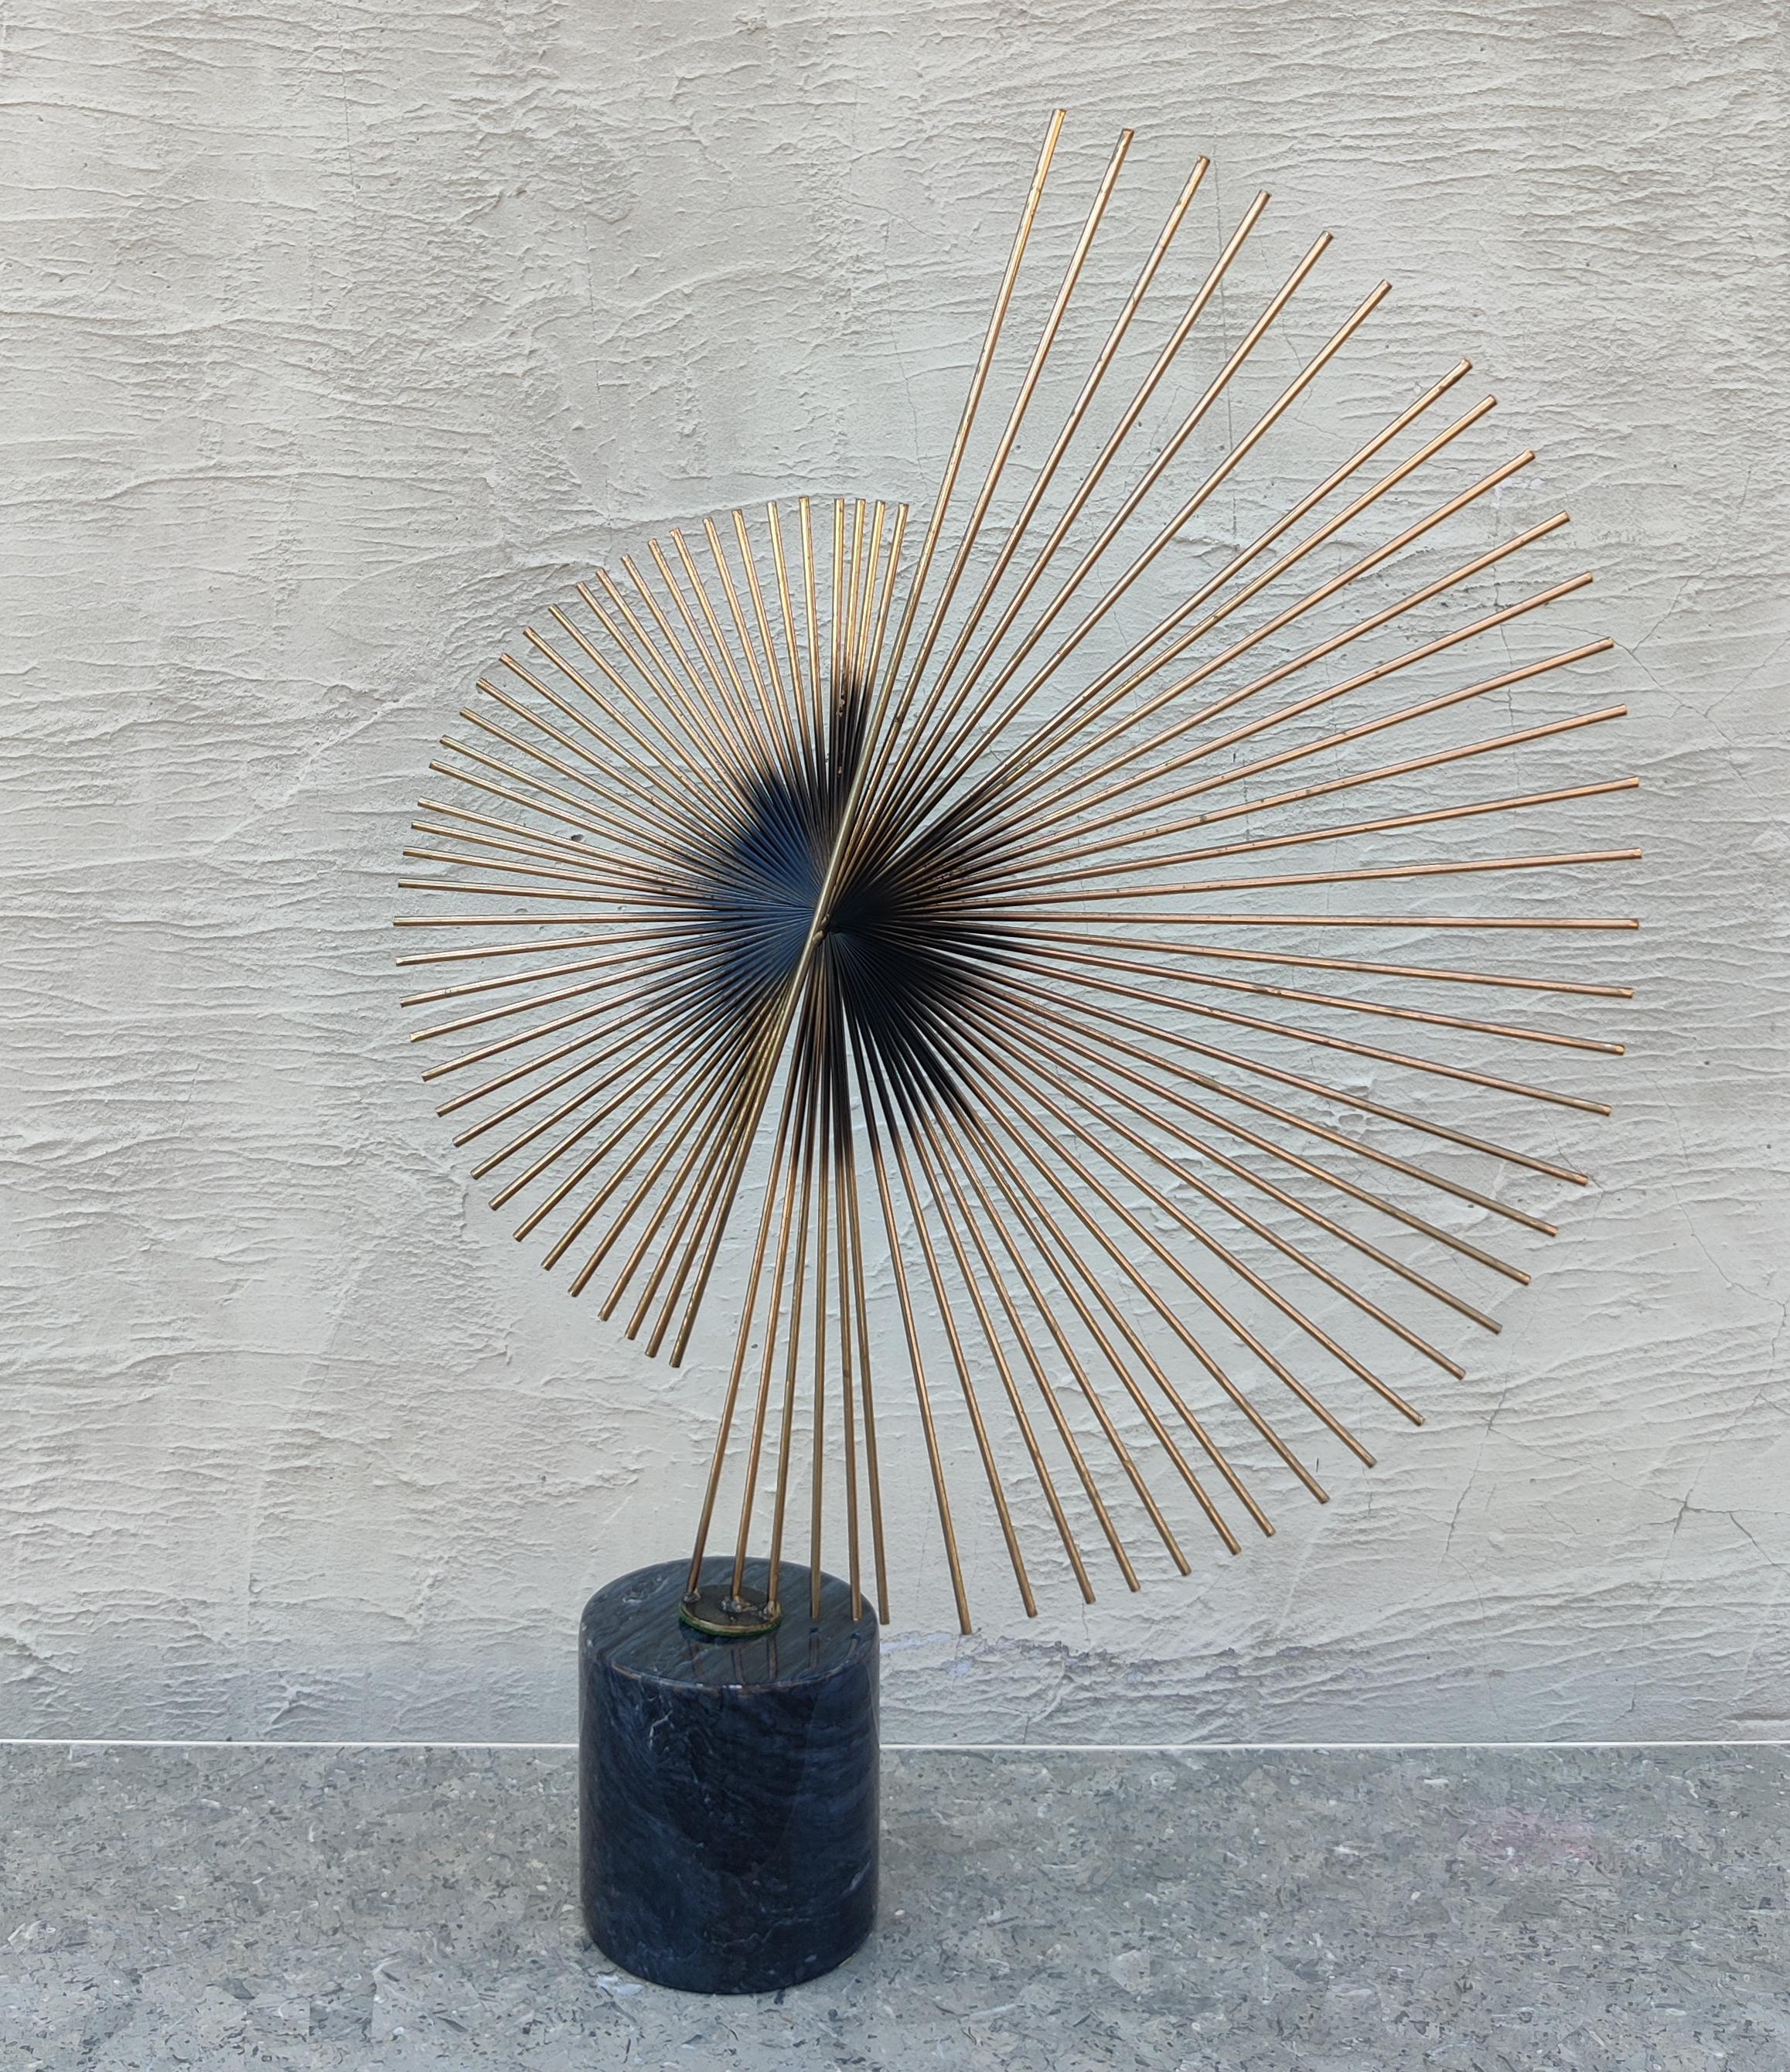 This stunning Curtis Jere sculpture was made in 1987, and features a superb and iconic design. Made of 40 long brass rods welded to each other across a center line, it forms an exaggerated spiral that catches your attention from every angle. This is